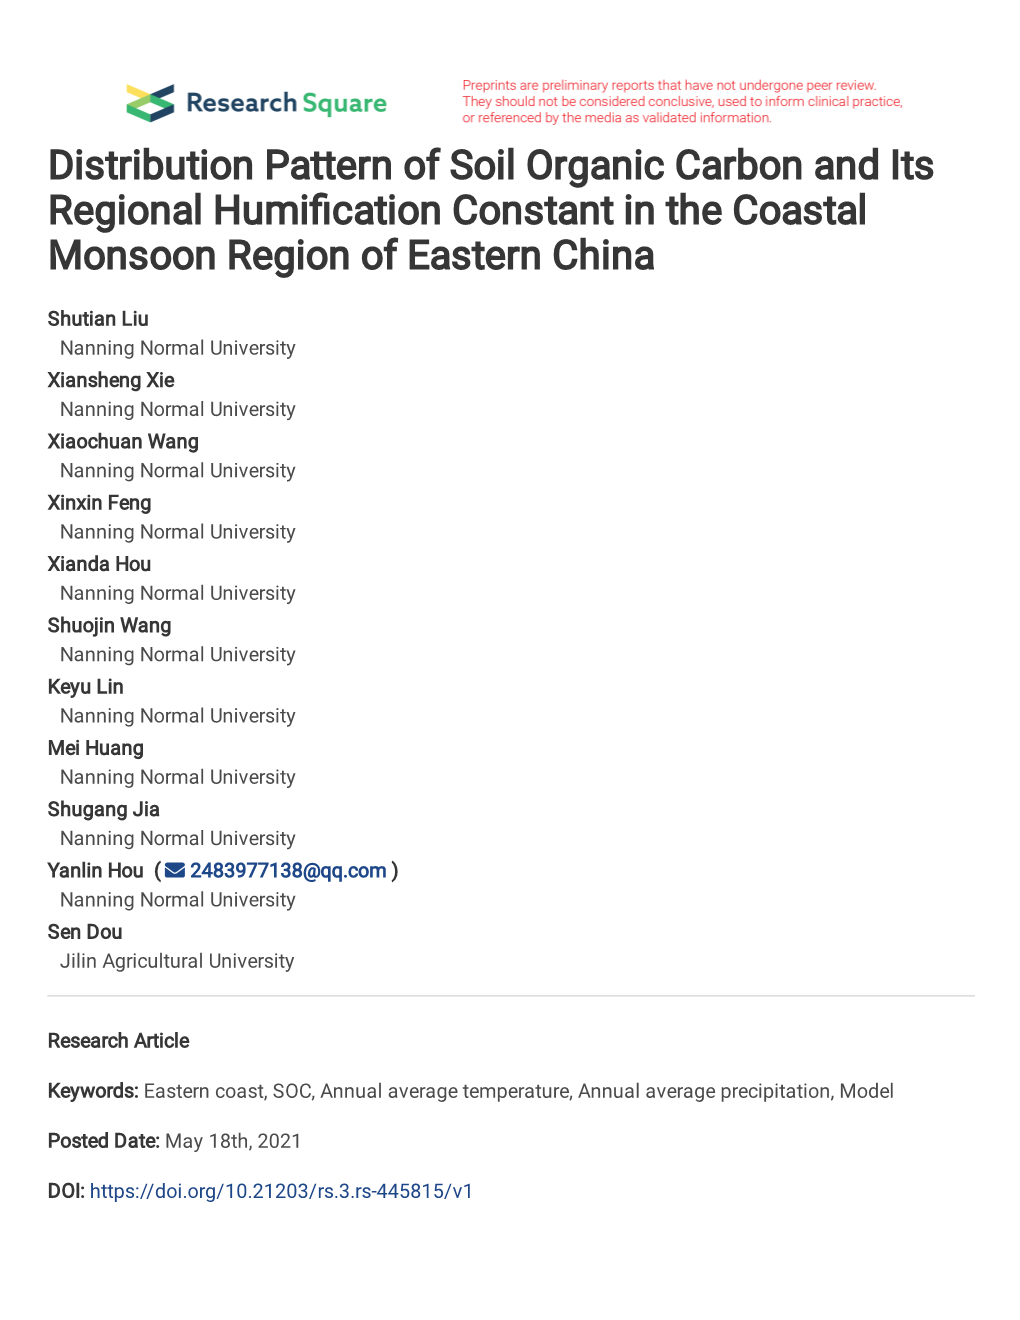 Distribution Pattern of Soil Organic Carbon and Its Regional Humi�Cation Constant in the Coastal Monsoon Region of Eastern China